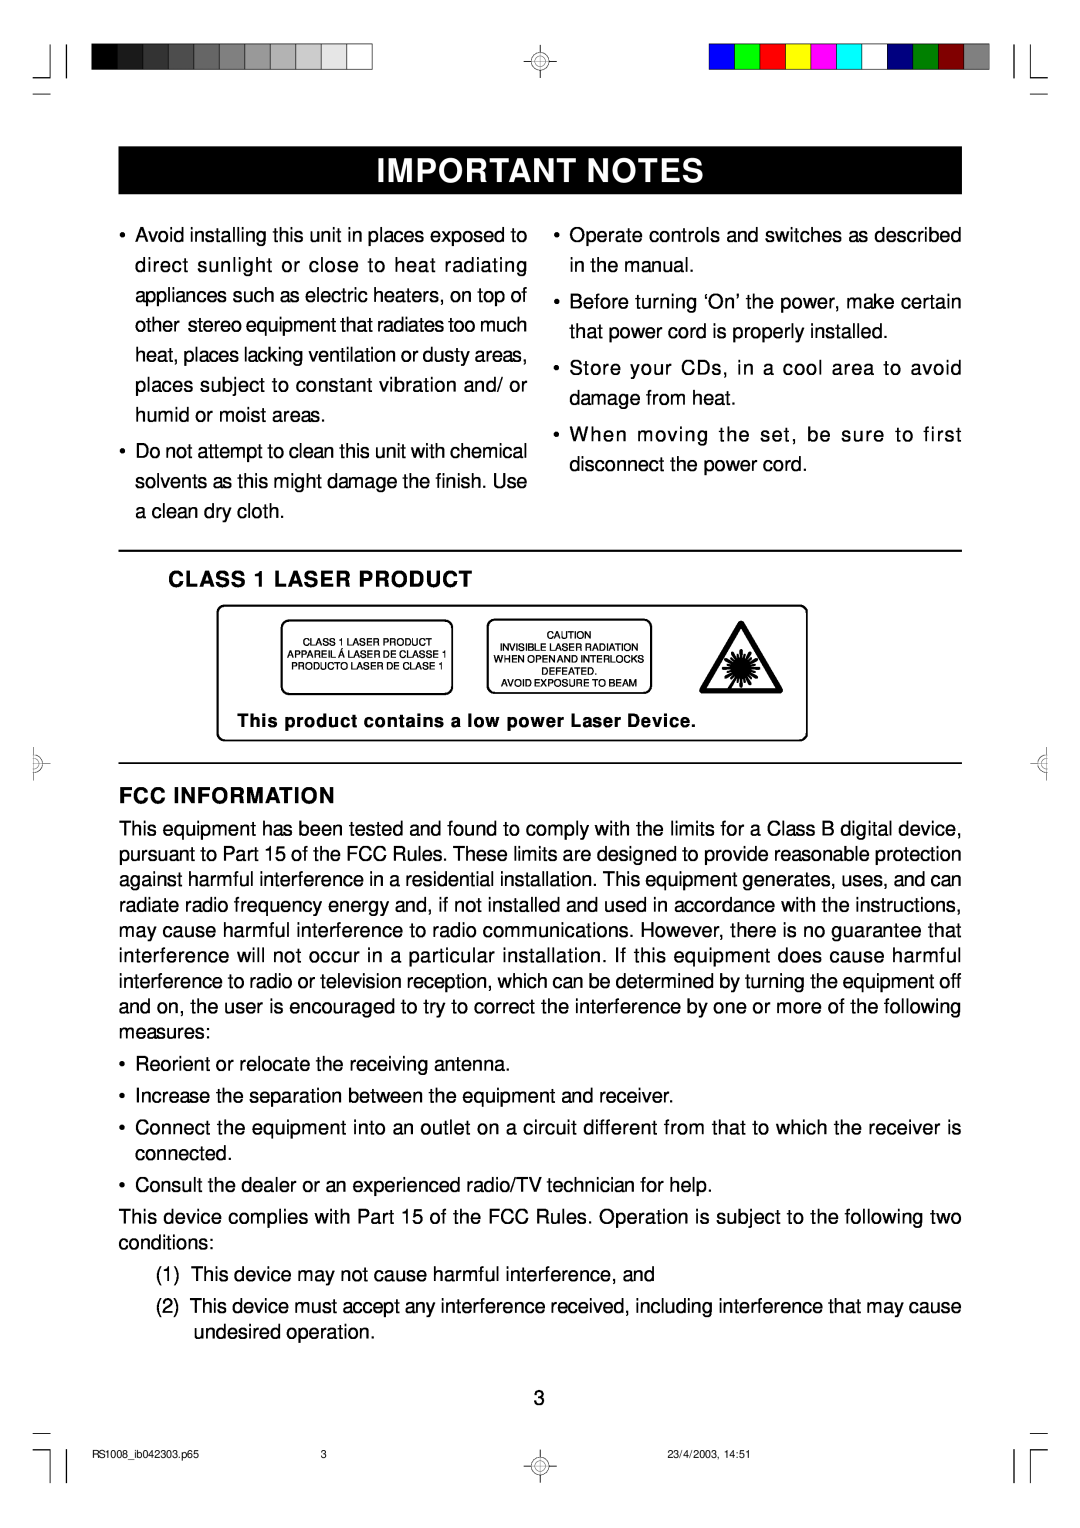 Emerson RS1008 owner manual Important Notes, CLASS 1 LASER PRODUCT, Fcc Information 